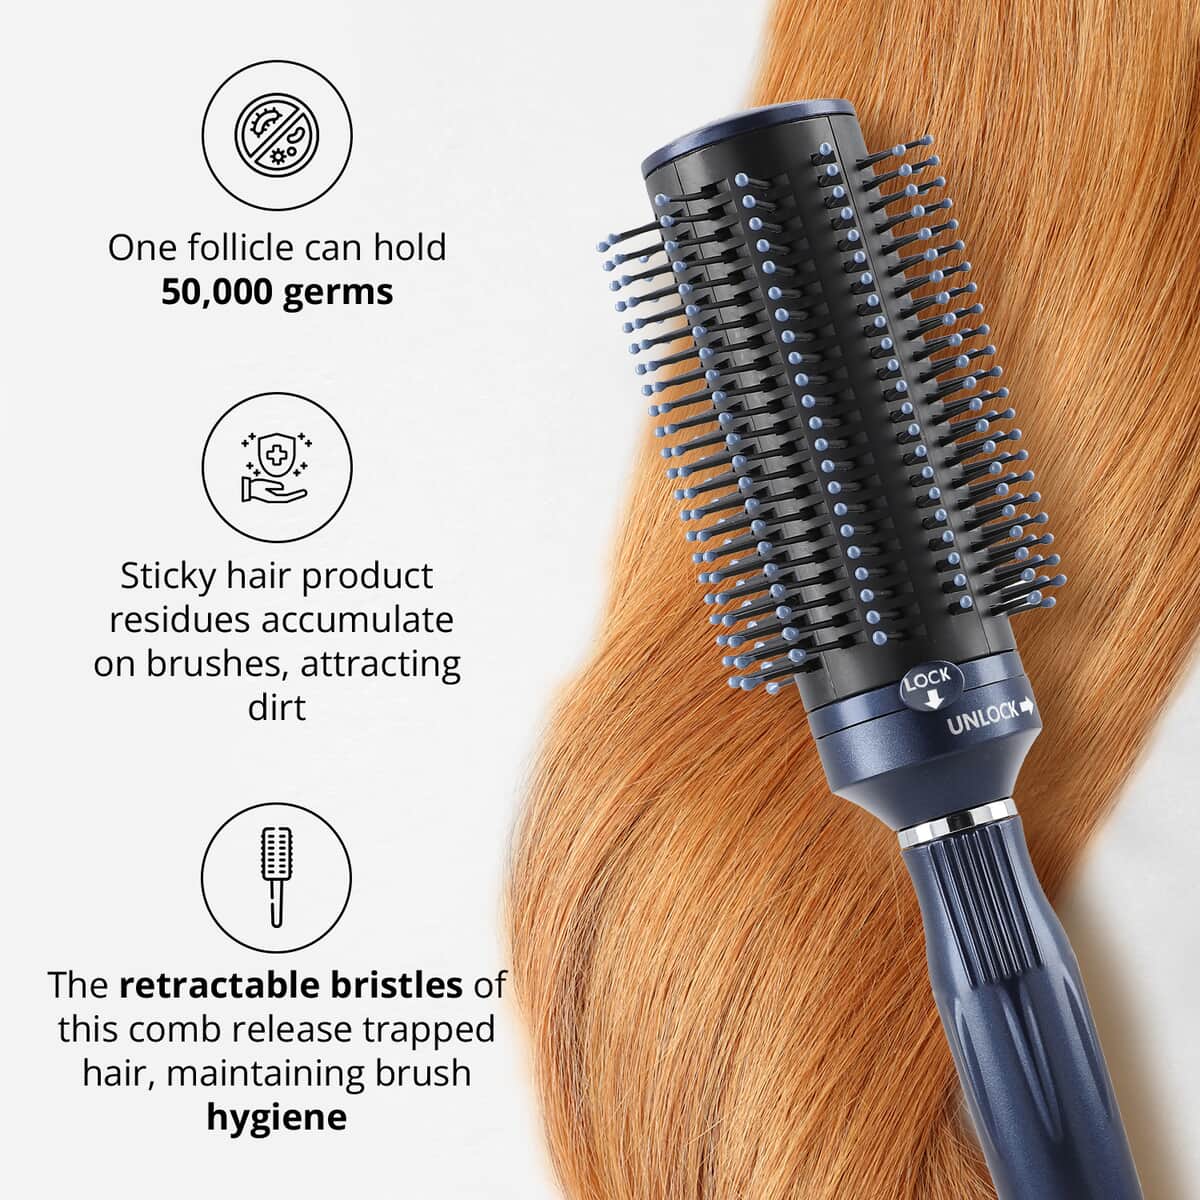 Neomi Detangler Hair Brush With Retractable Bristle Technology, Quick Clean Hair Comb For Loosening and Detangling - Navy (Patent Pending) (Del. in 7-10 Days) image number 5